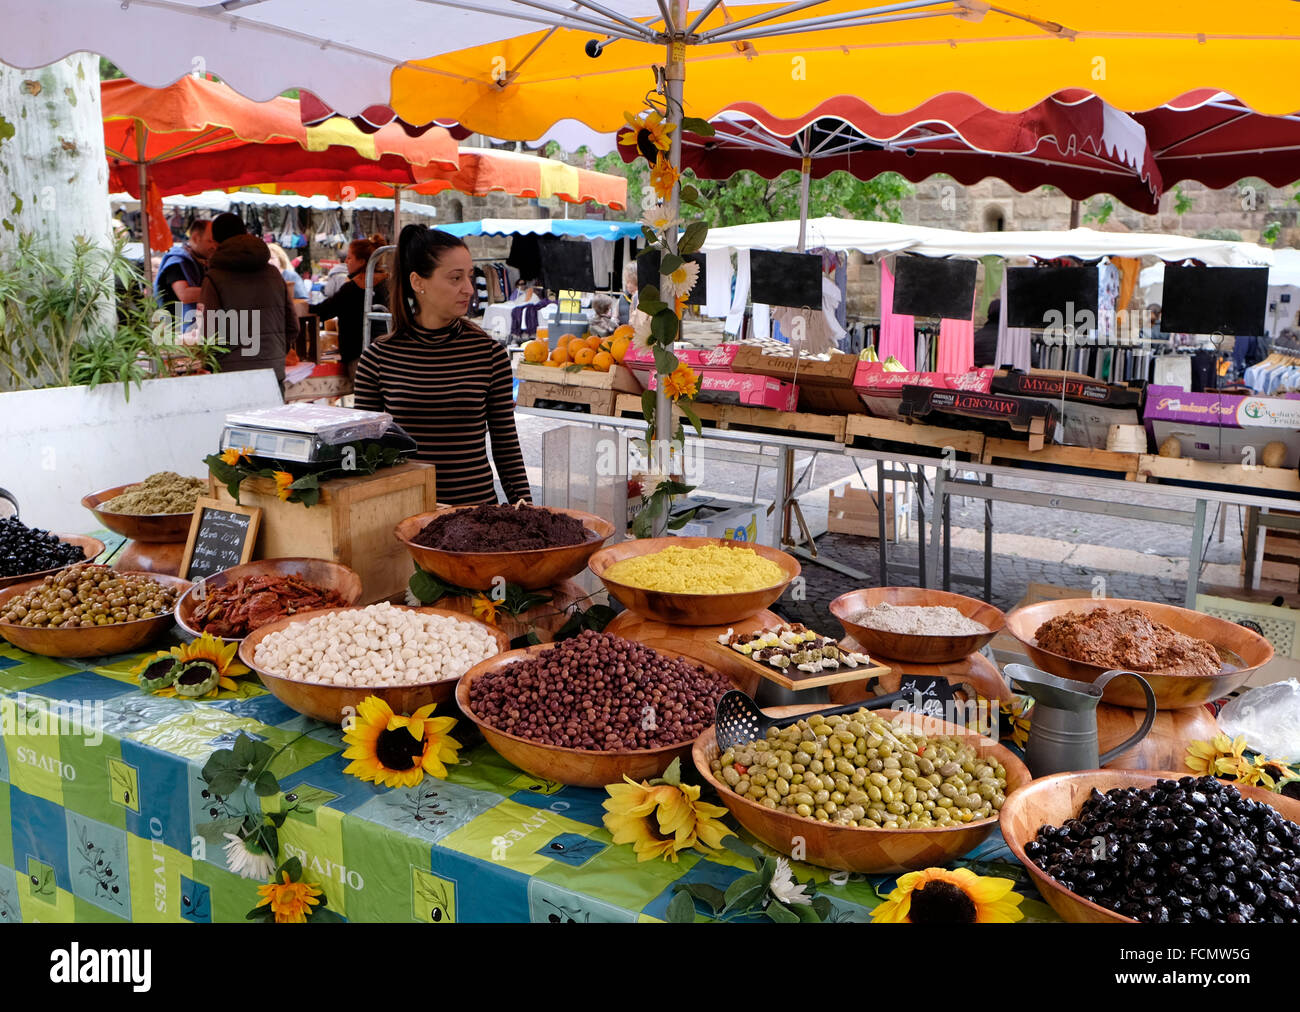 Olive stall and stallholder in the market at Fréjus, South of France. Stock Photo